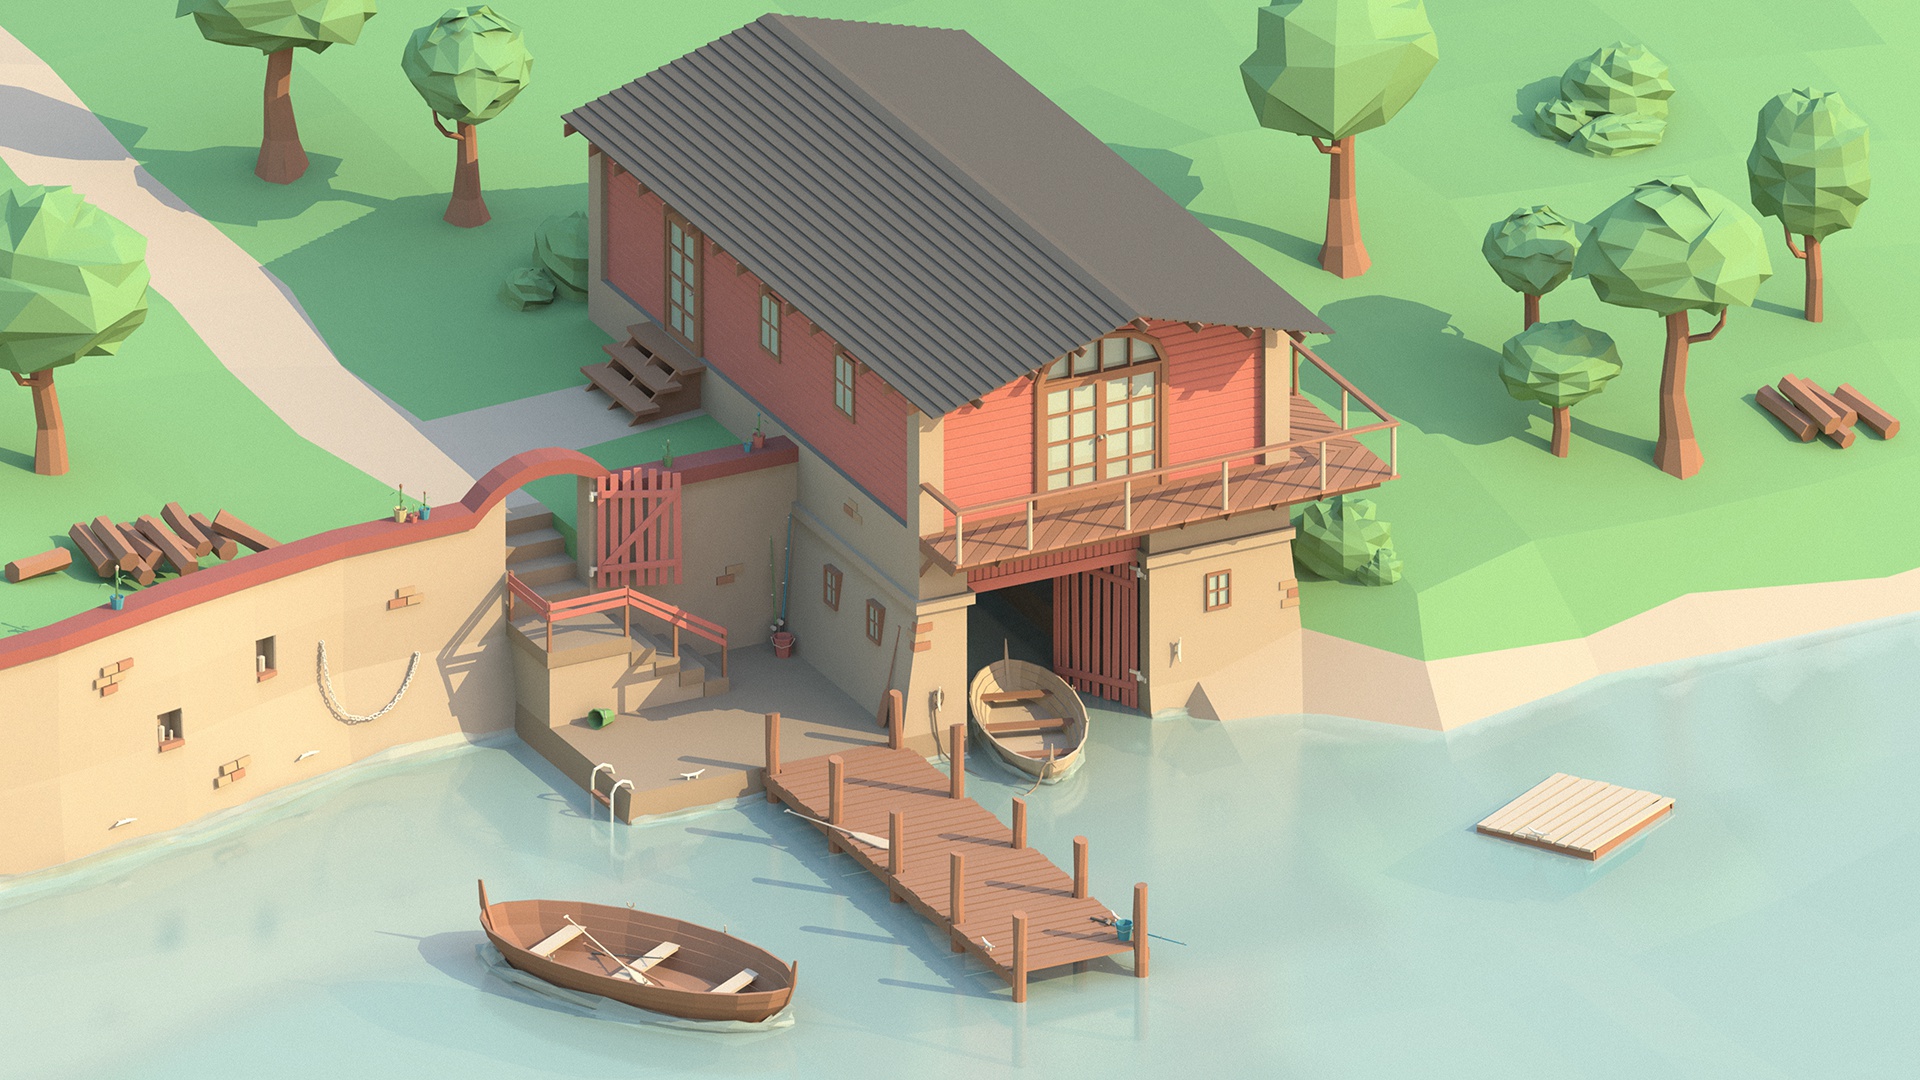 General 1920x1080 low poly house water boat digital art